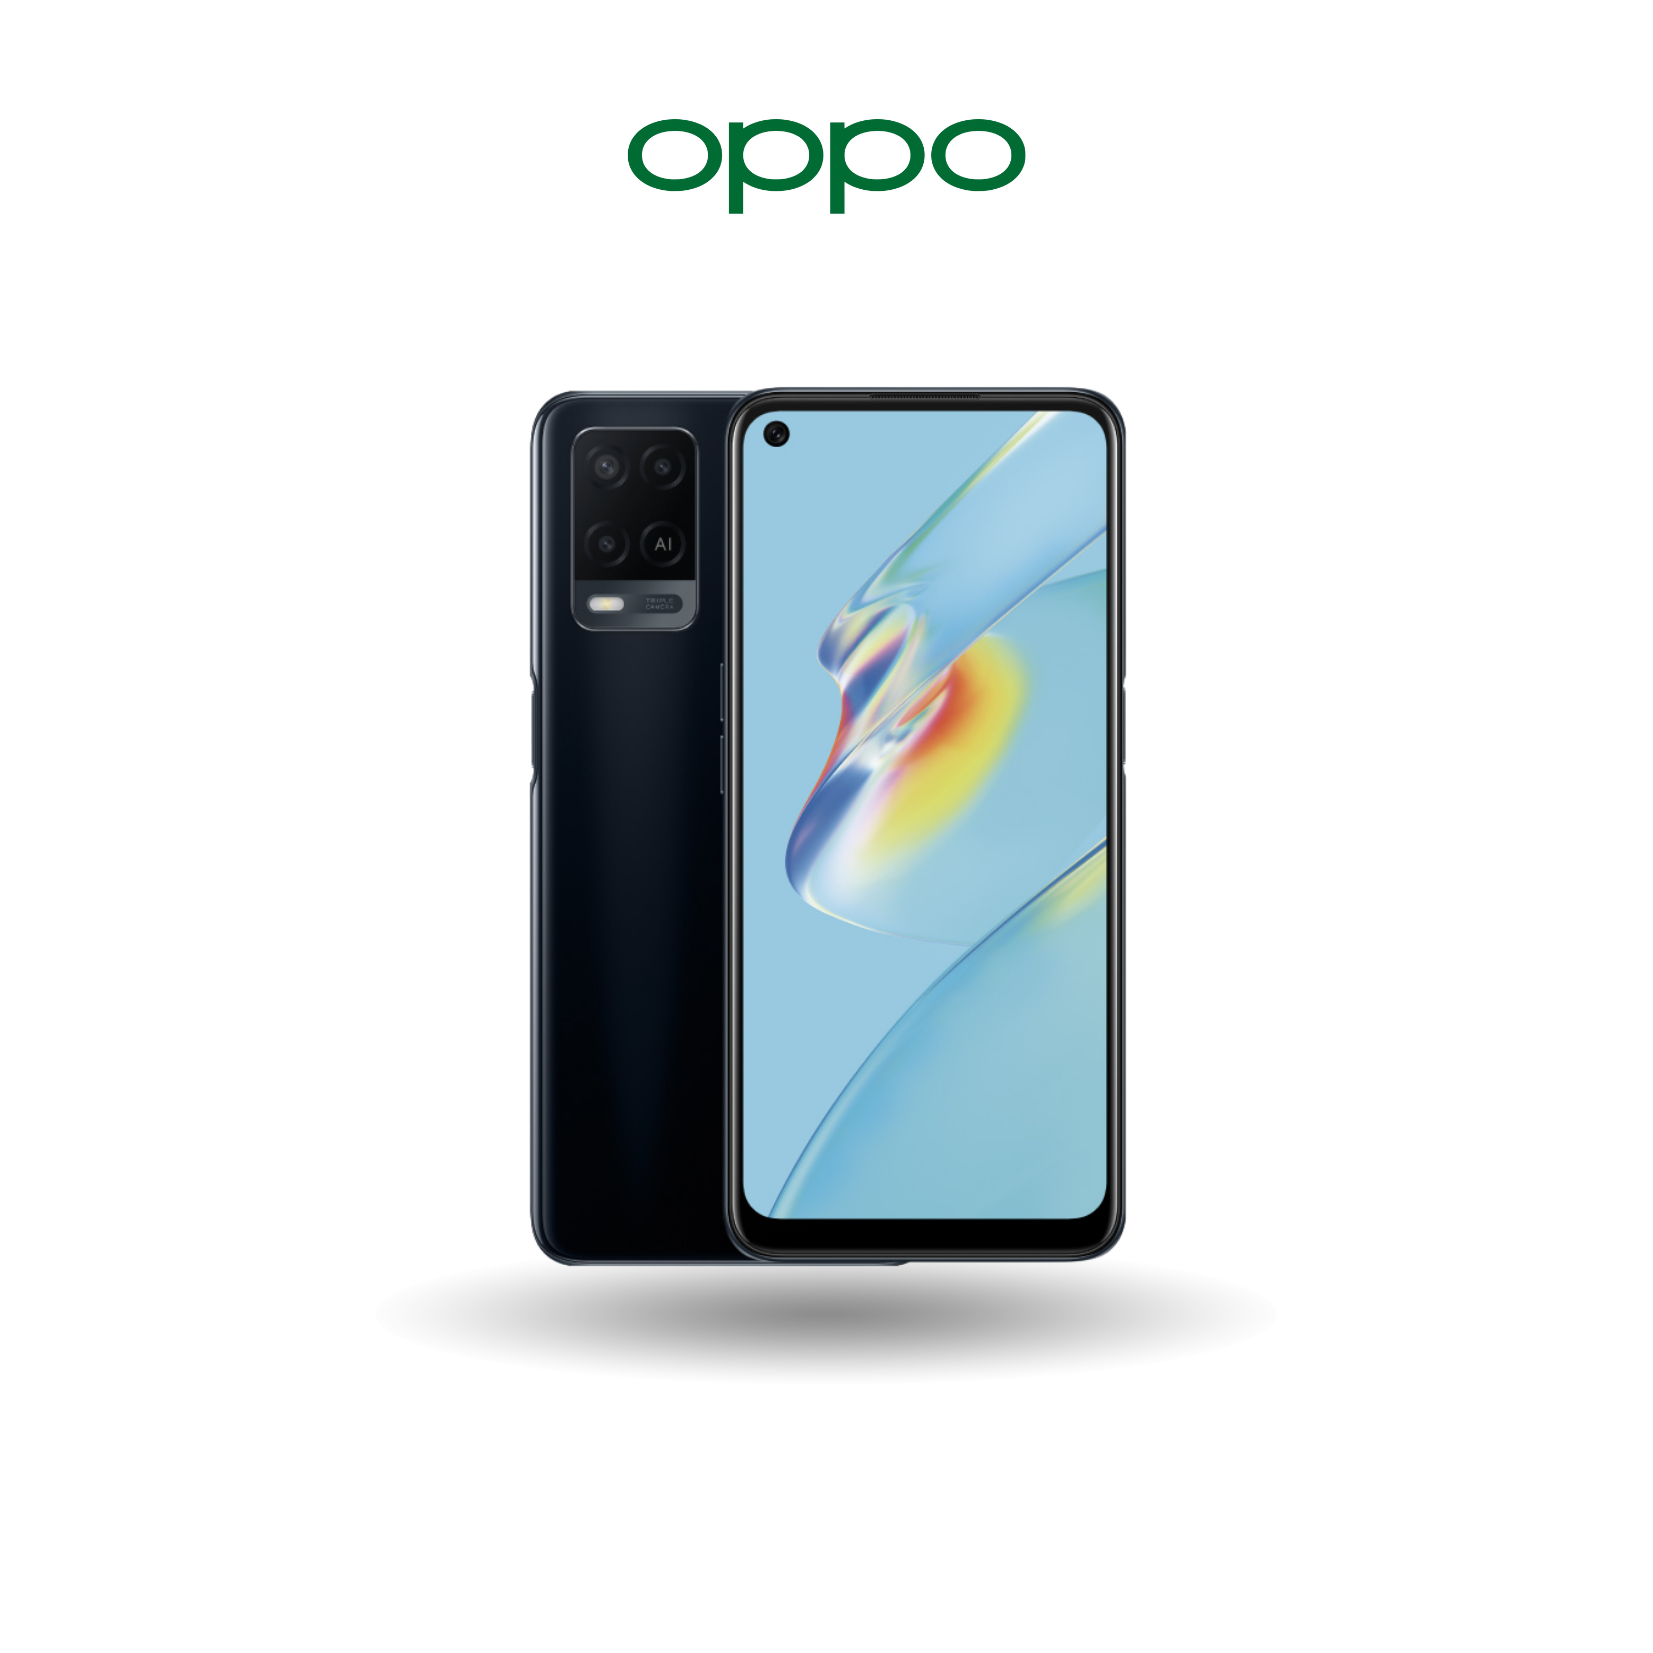 Oppo A54 (64GB)- Eye-Care Punch-Hole Display | 16MP Selfie Camera | 18W Fast Charge